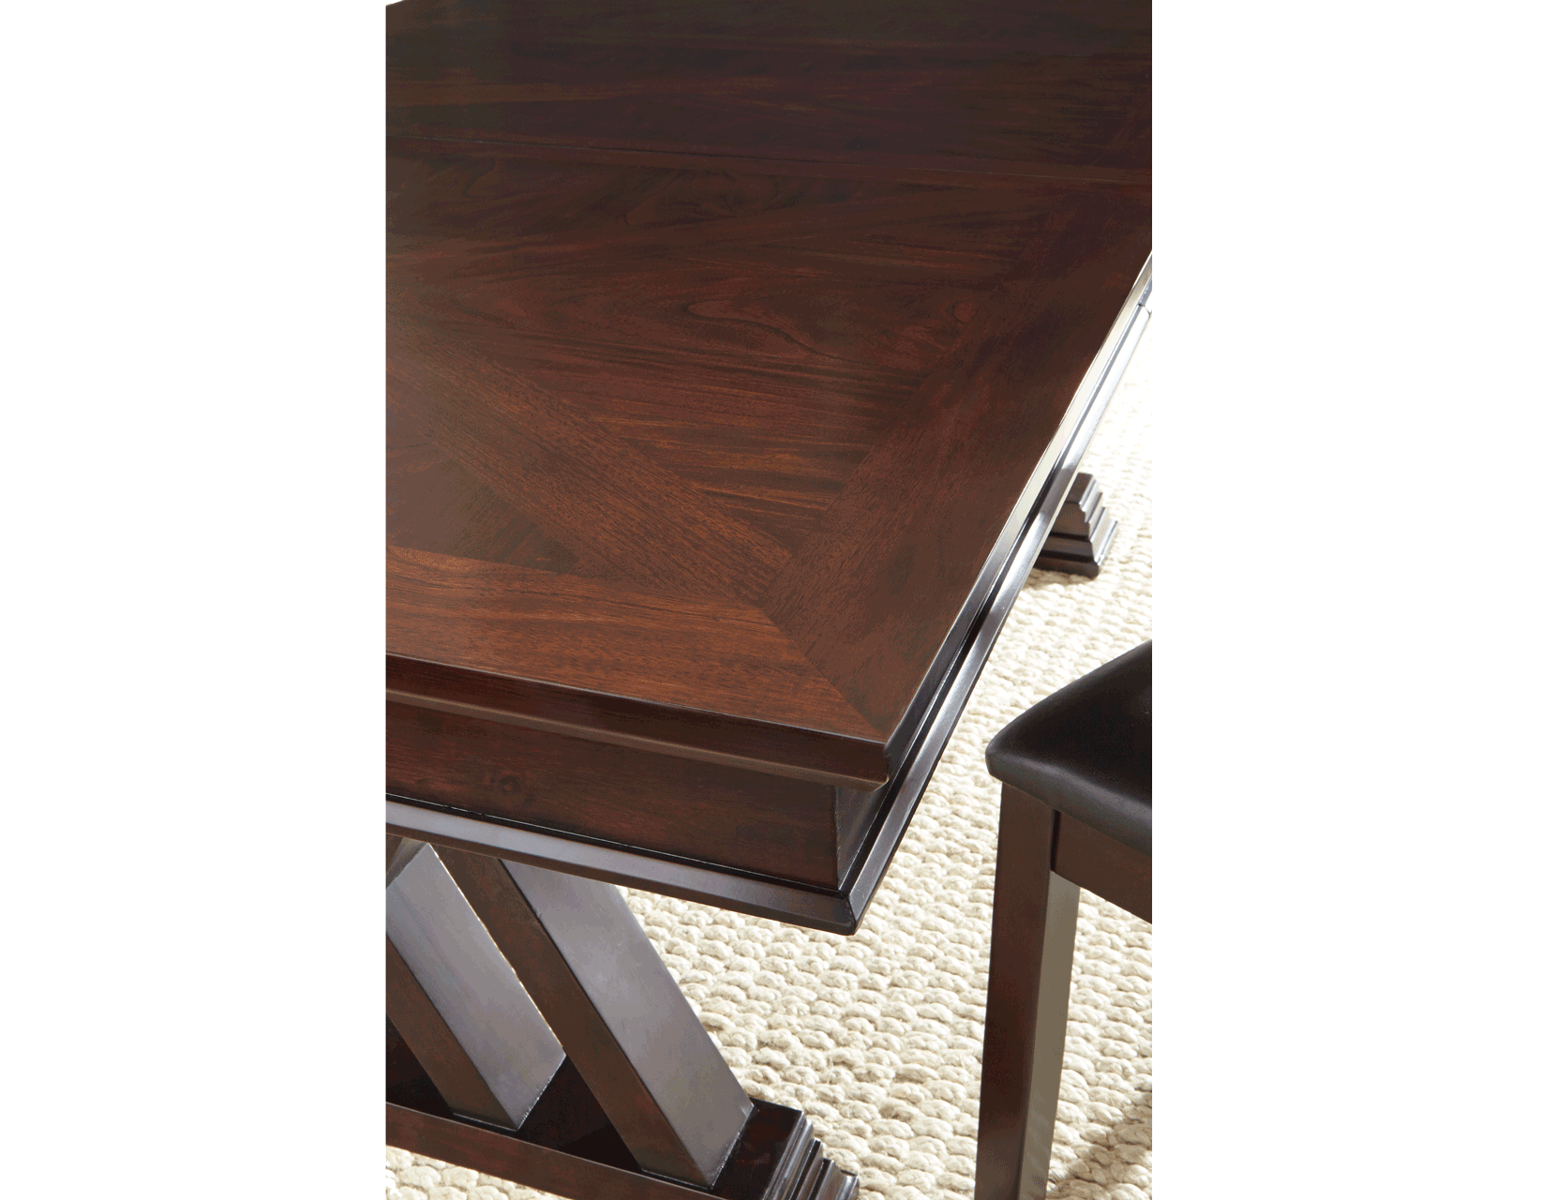 Steve Silver Adrian Dining Table in Espresso Cherry